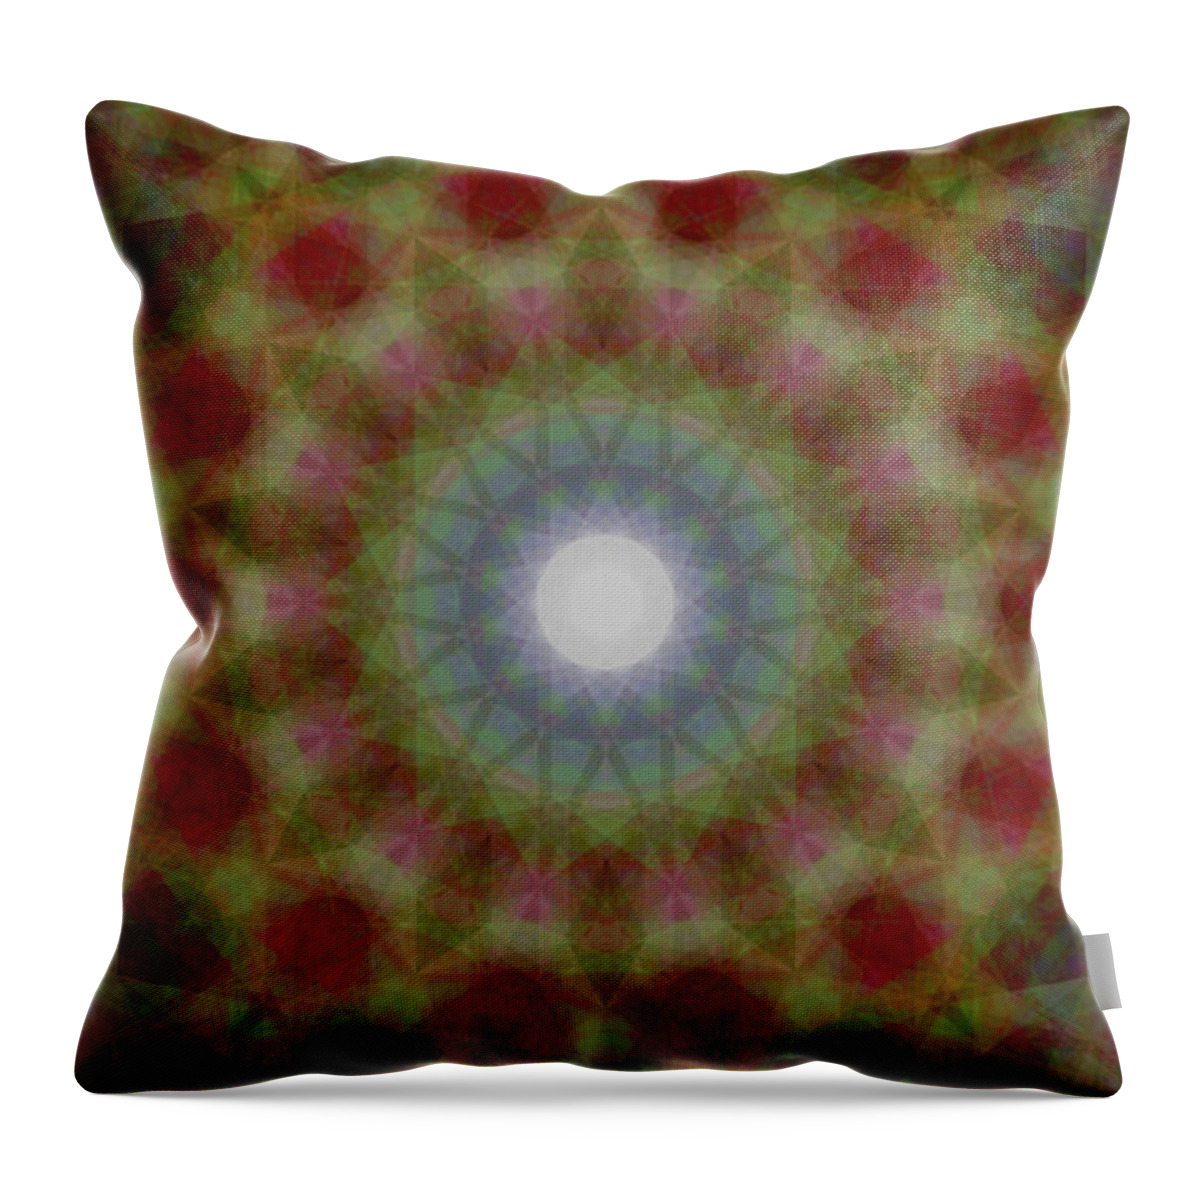  Throw Pillow featuring the digital art P-1 3l 14d by Primary Design Co